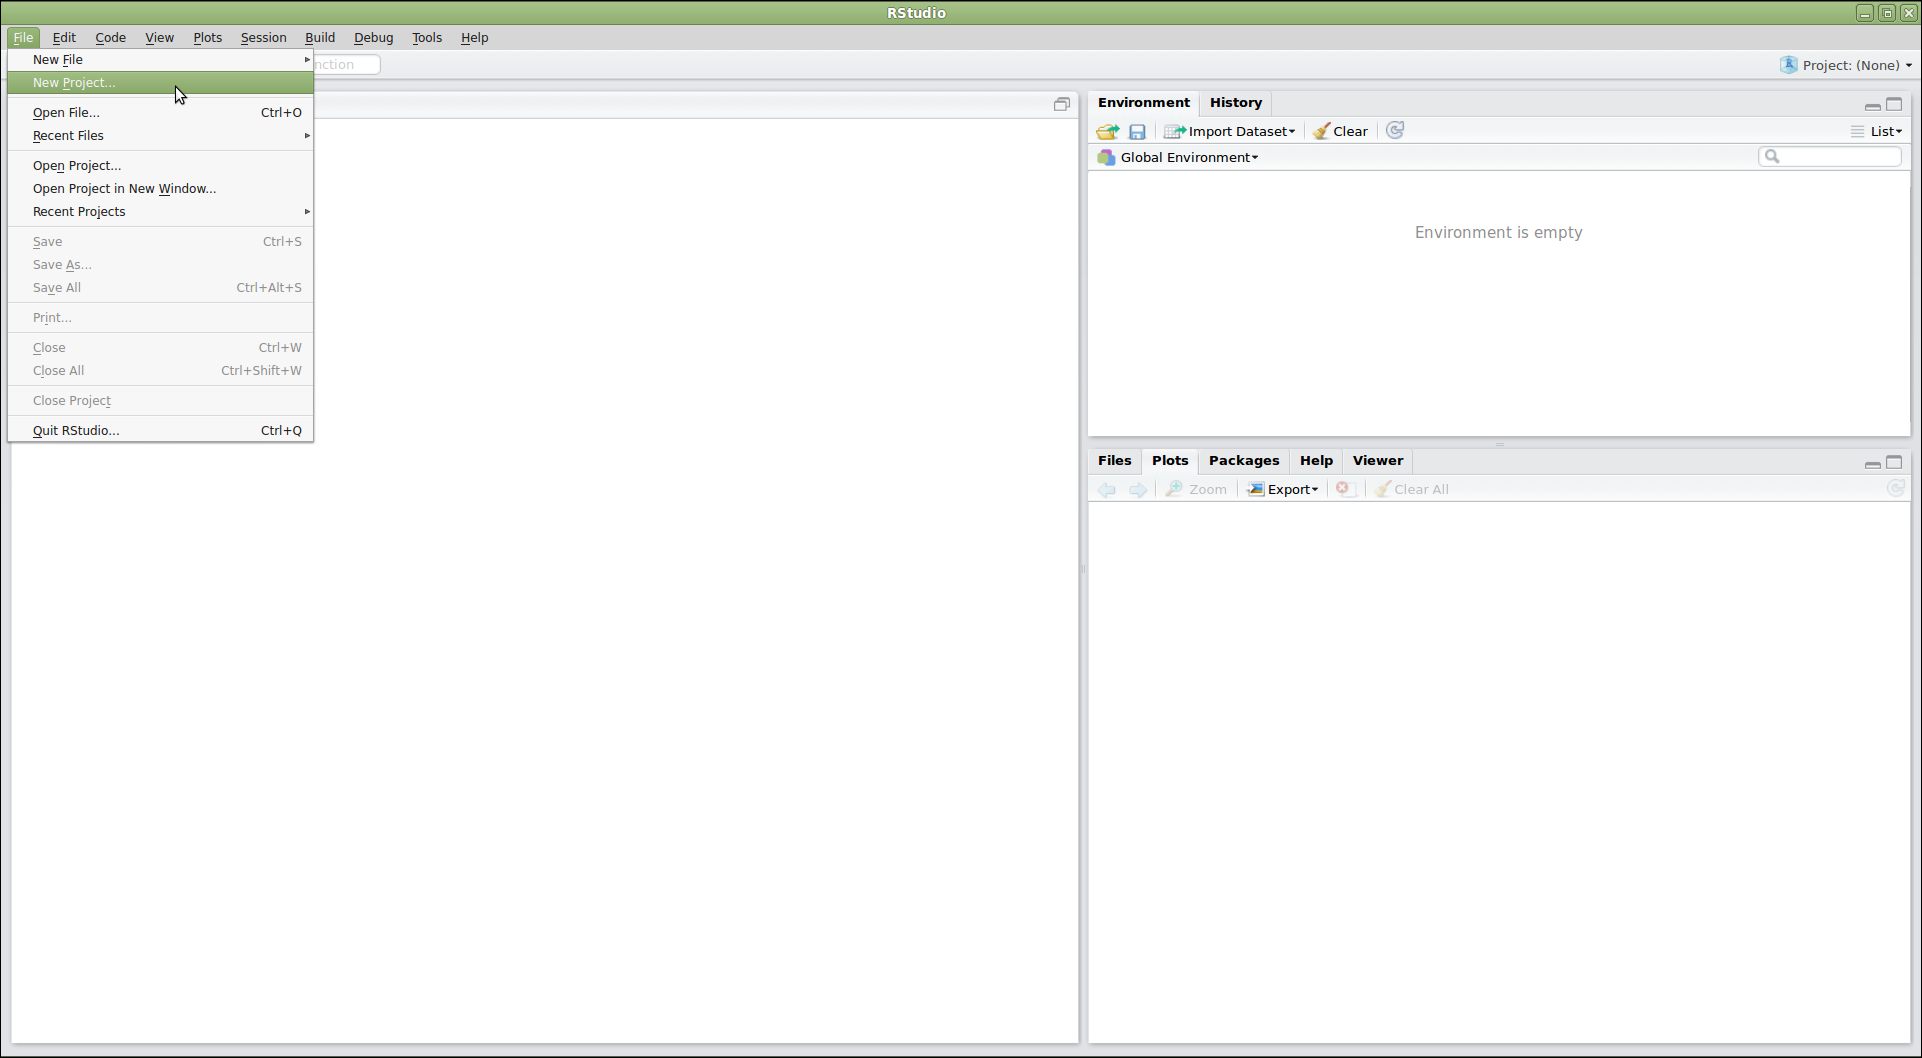 RStudio screenshot showing the file menu dropdown with "New Project..." selected